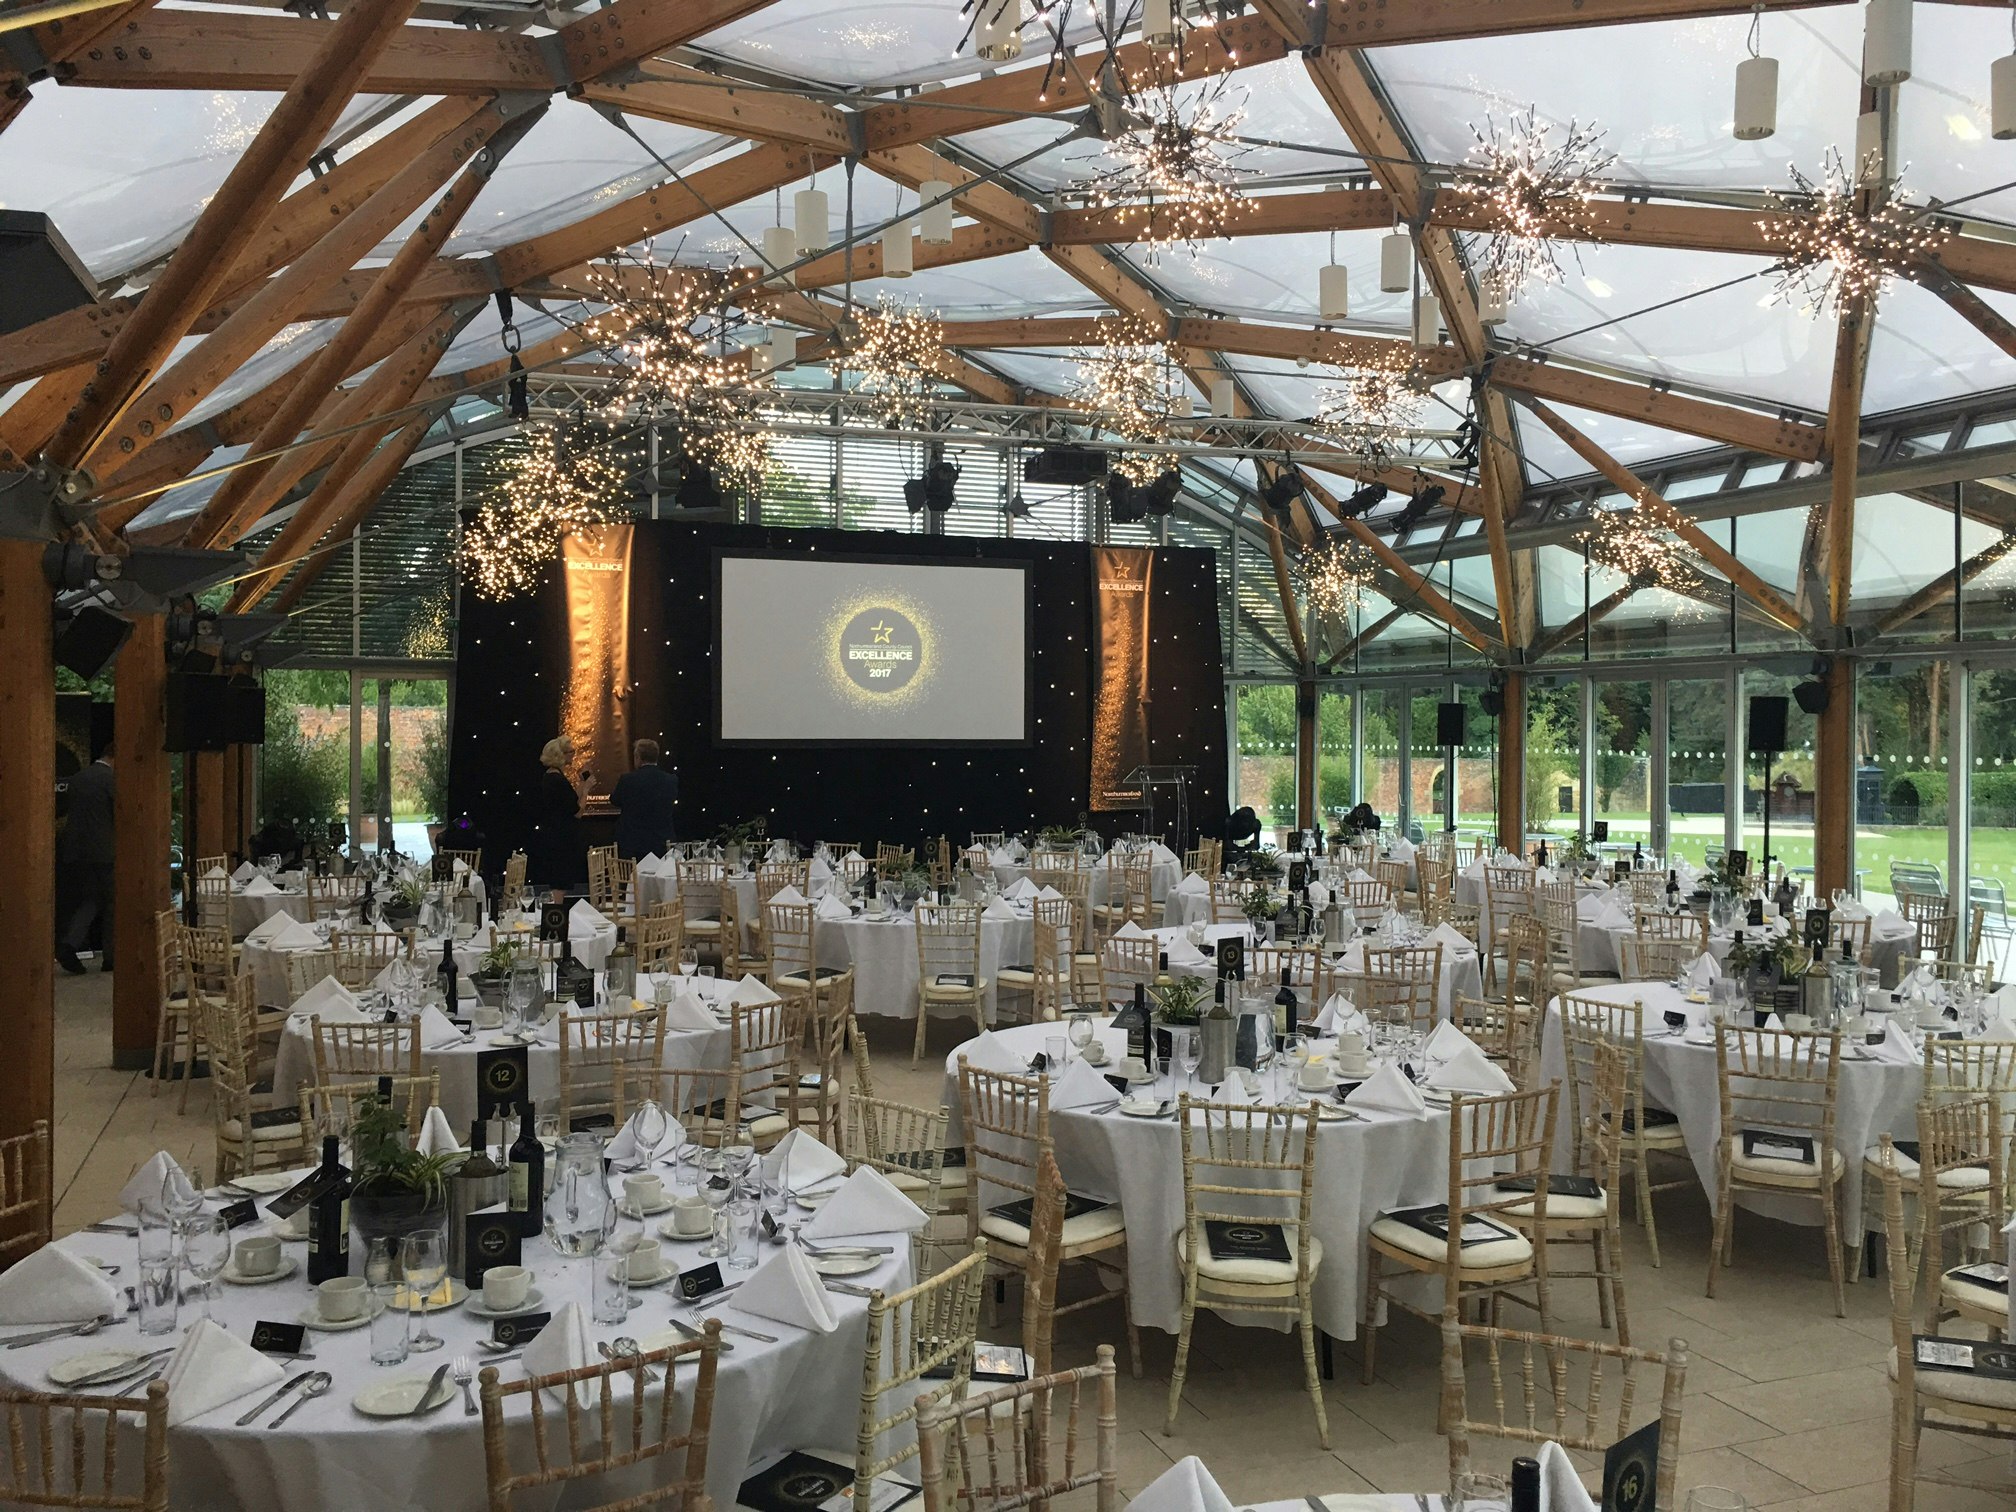 The Pavilion at The Alnwick Garden  - The Pavilion Room image 3